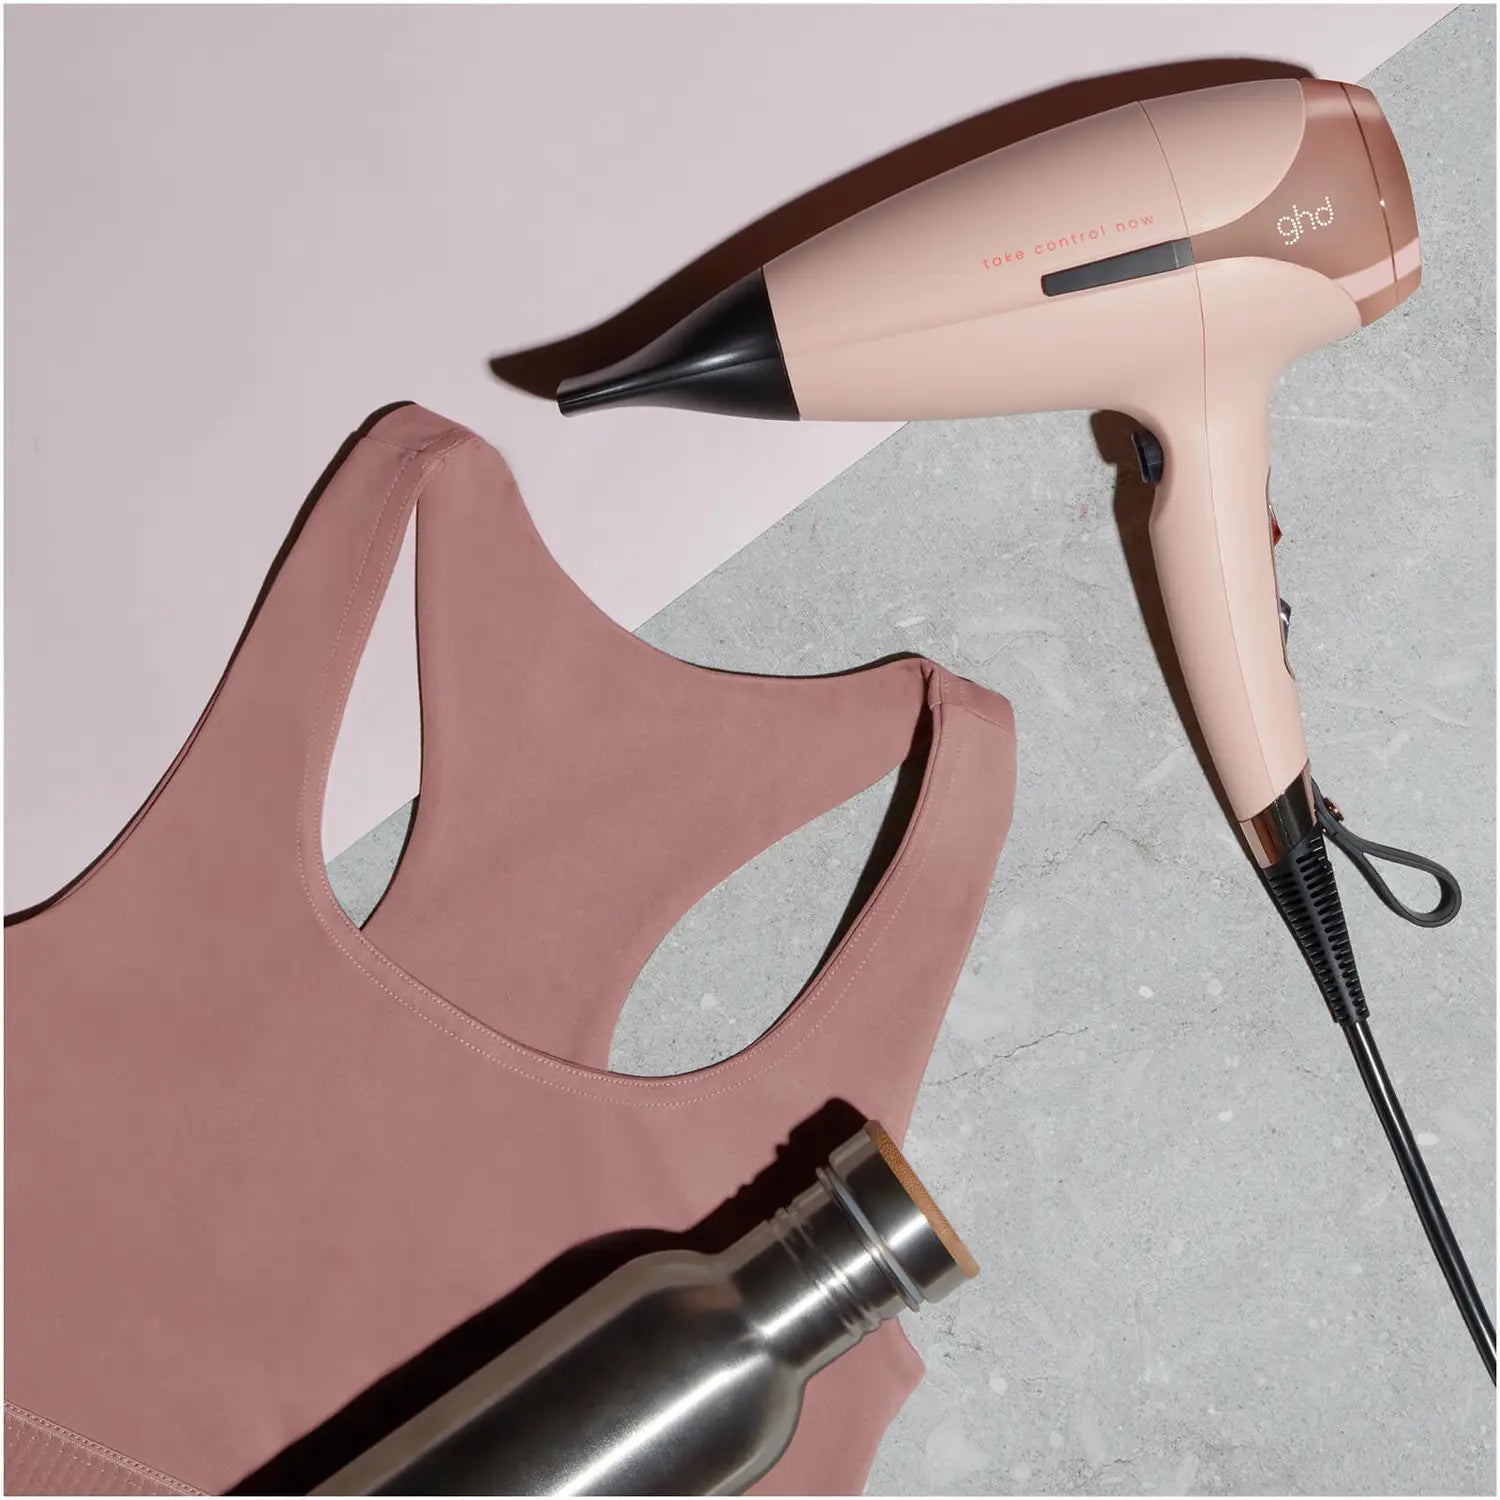 GHD HELIOS™ PROFESSIONAL HAIR DRYER - PINK COLLECTION